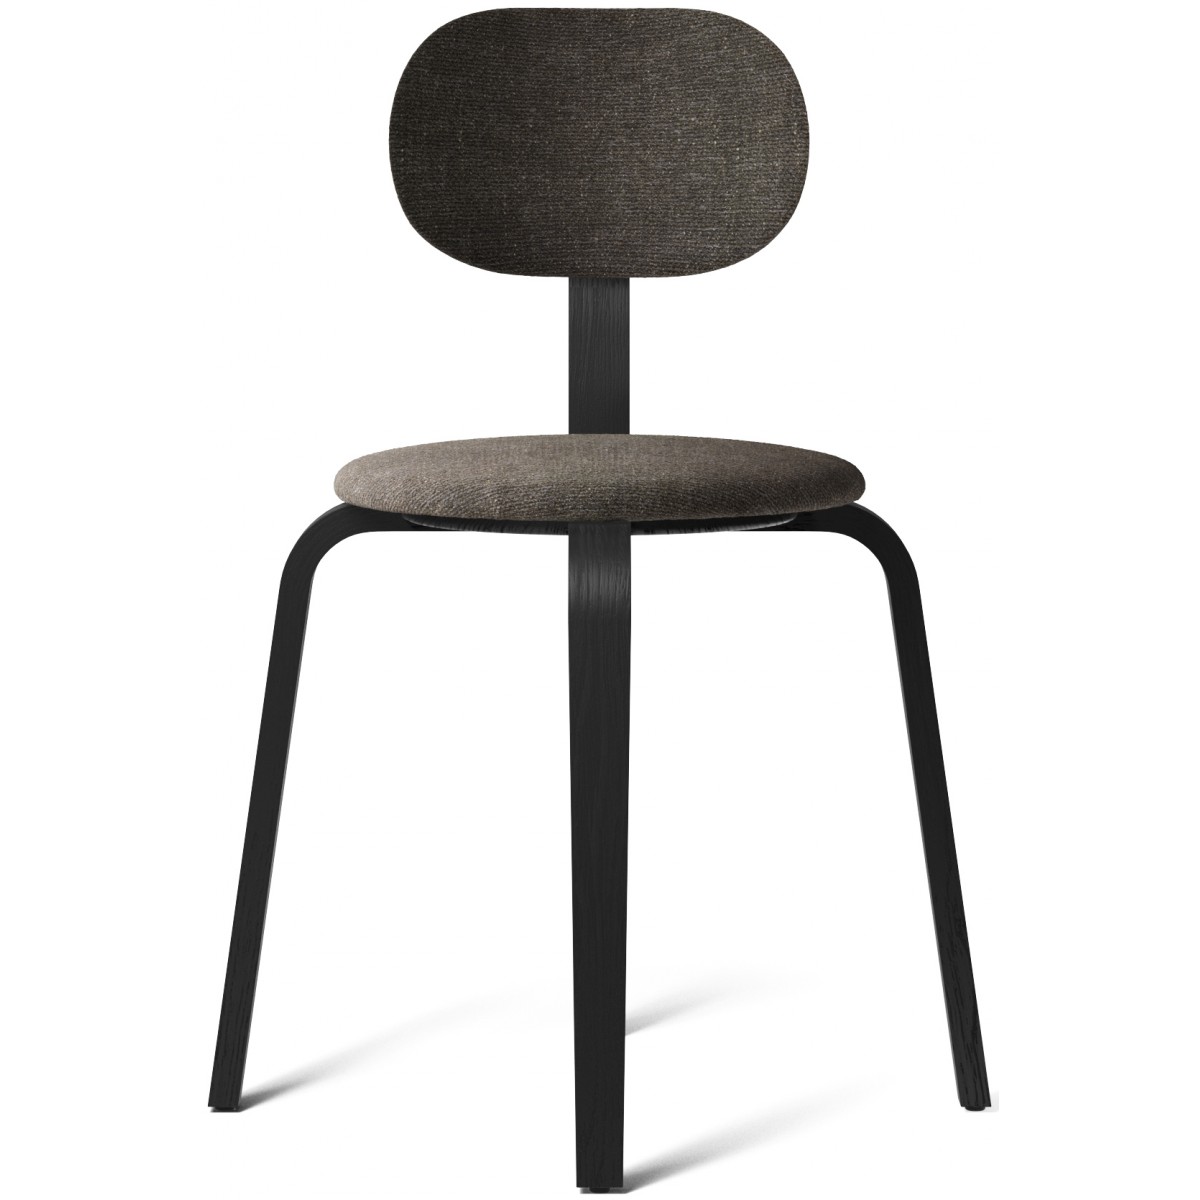 Afteroom Plywood Dining chair – black ash + Moss 14 fabric